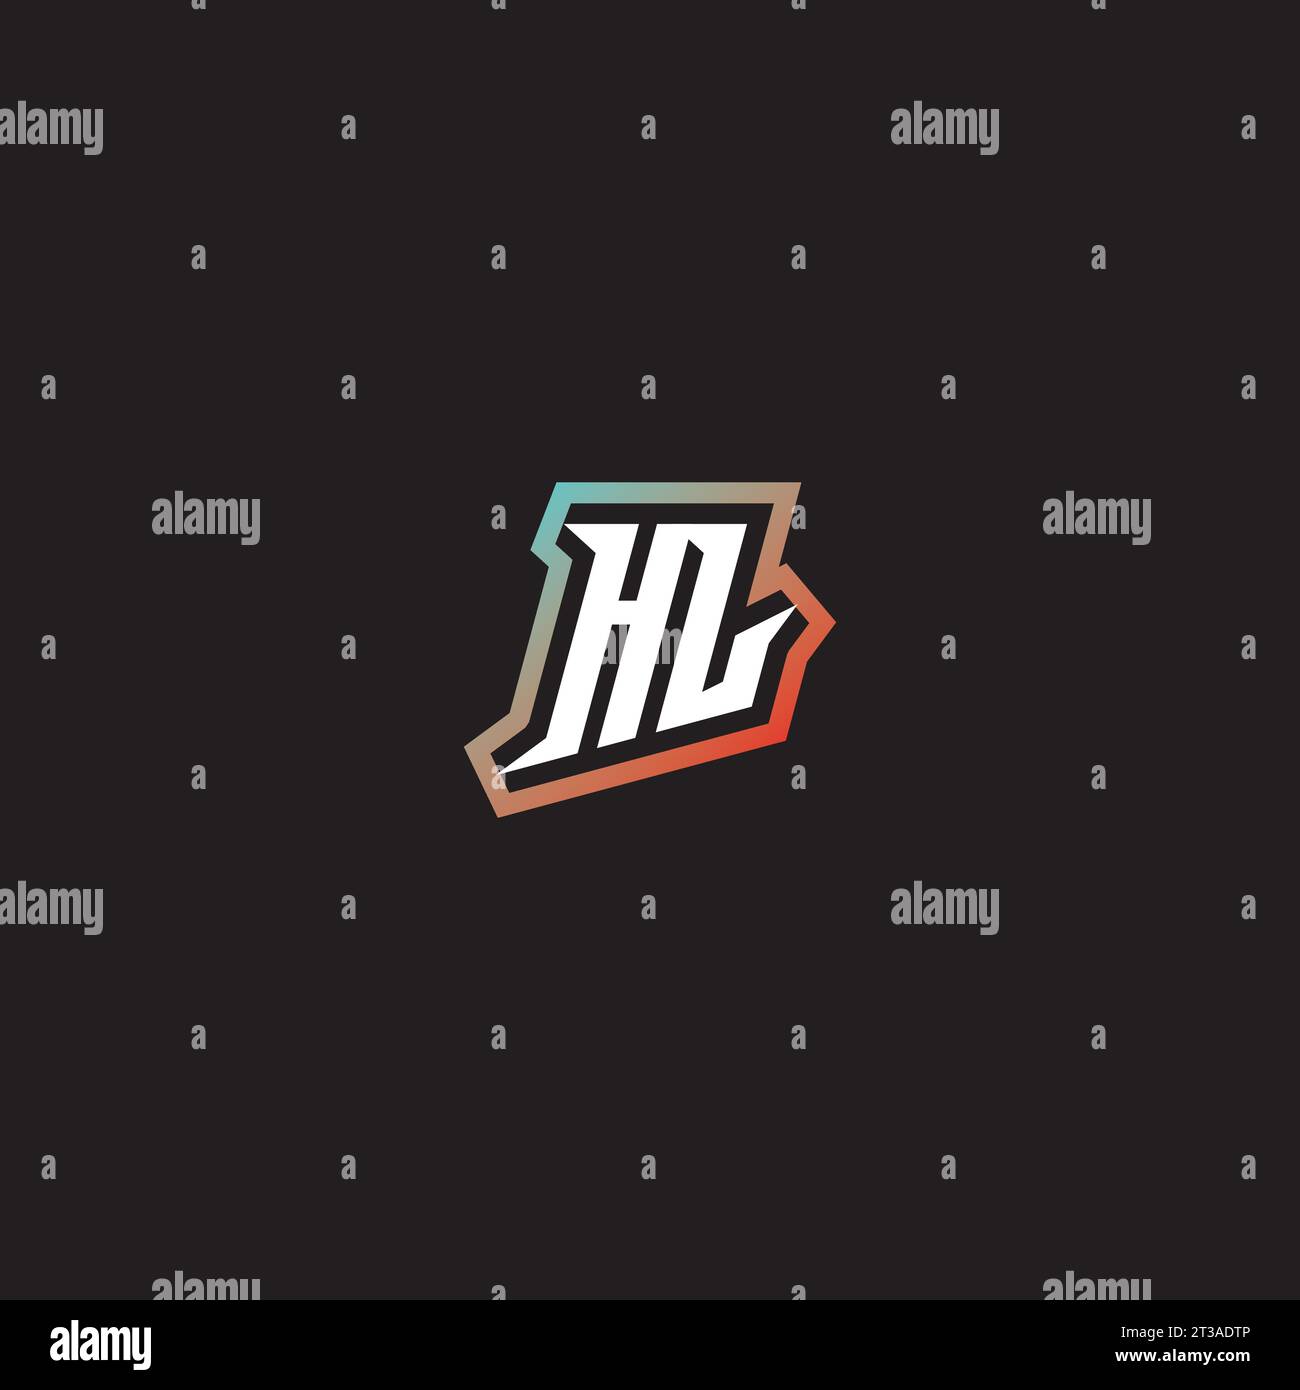 HL letter combination cool logo esport initial and cool color gradattion ideas Stock Vector